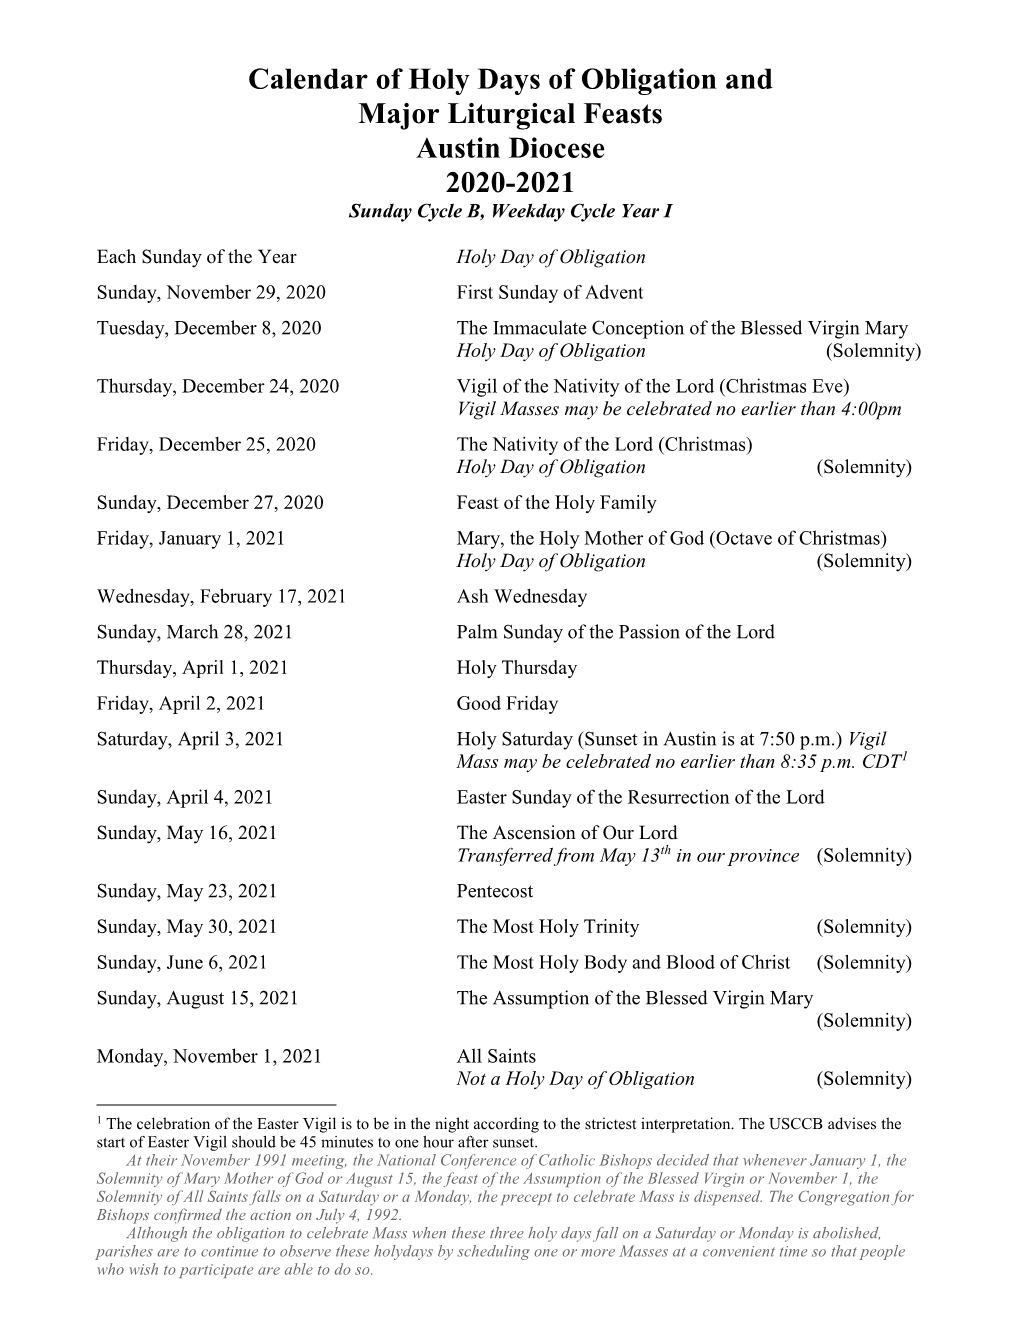 calendar-of-holy-days-of-obligation-and-major-liturgical-feasts-austin